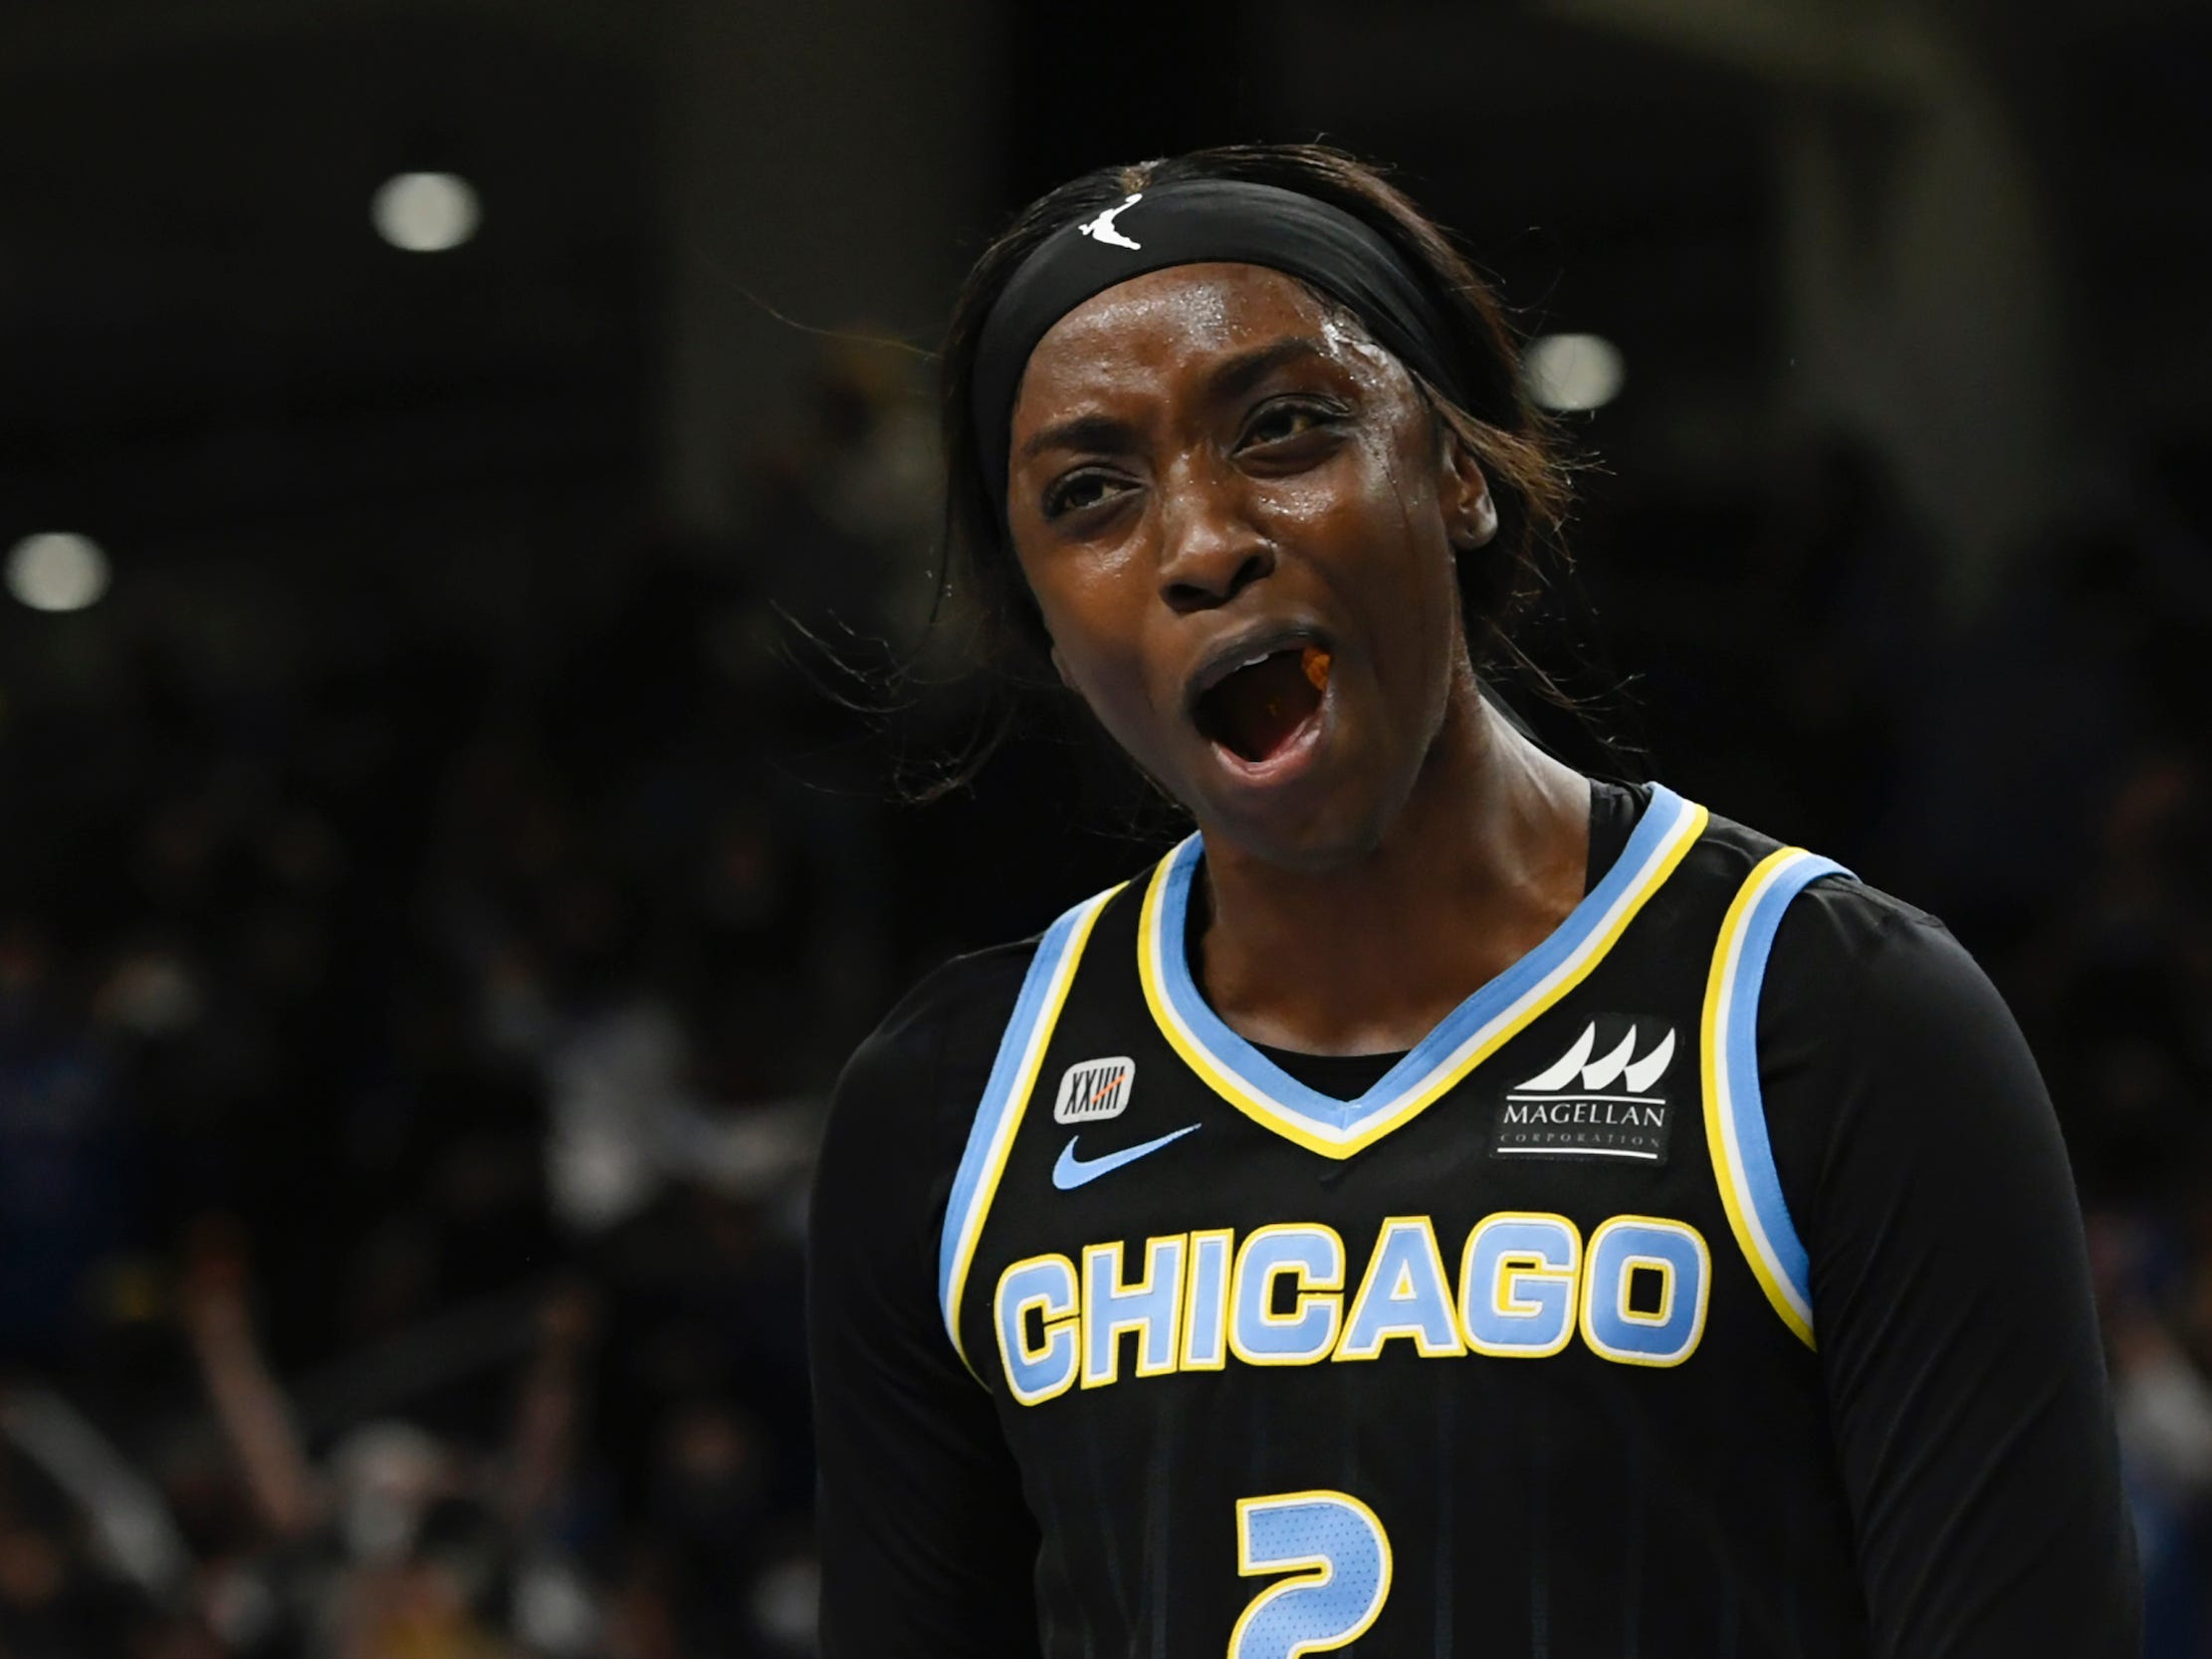 The WNBA Finals MVP dropped an Fbomb on live television following the